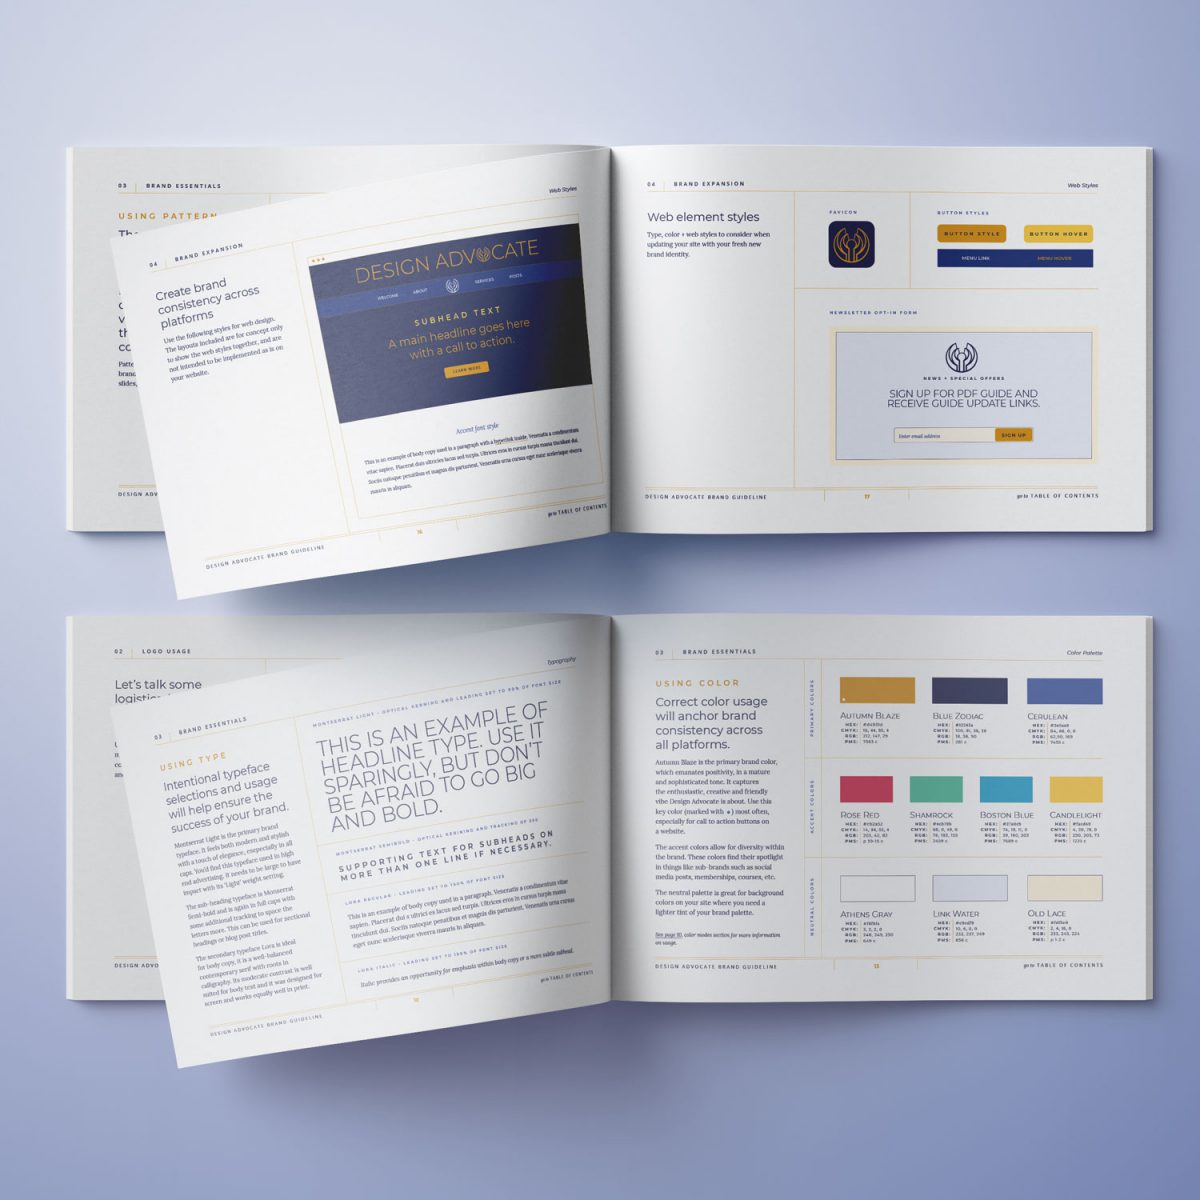 Essential Brand Style Guide from Design Advocate showing Sample Pages